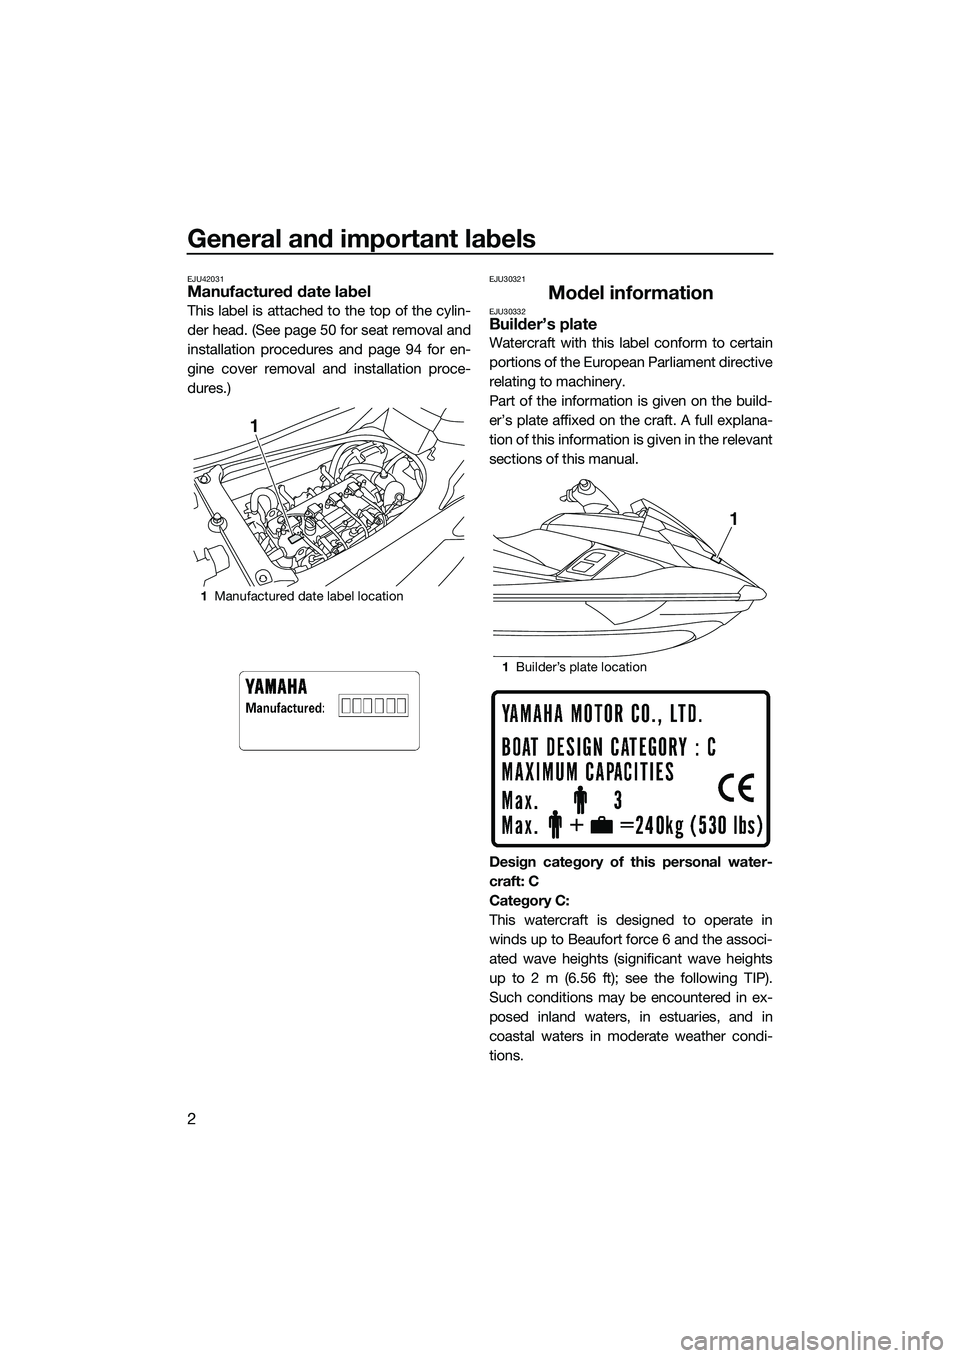 YAMAHA FX SVHO 2015  Owners Manual General and important labels
2
EJU42031Manufactured date label
This label is attached to the top of the cylin-
der head. (See page 50 for seat removal and
installation procedures and page 94 for en-
g